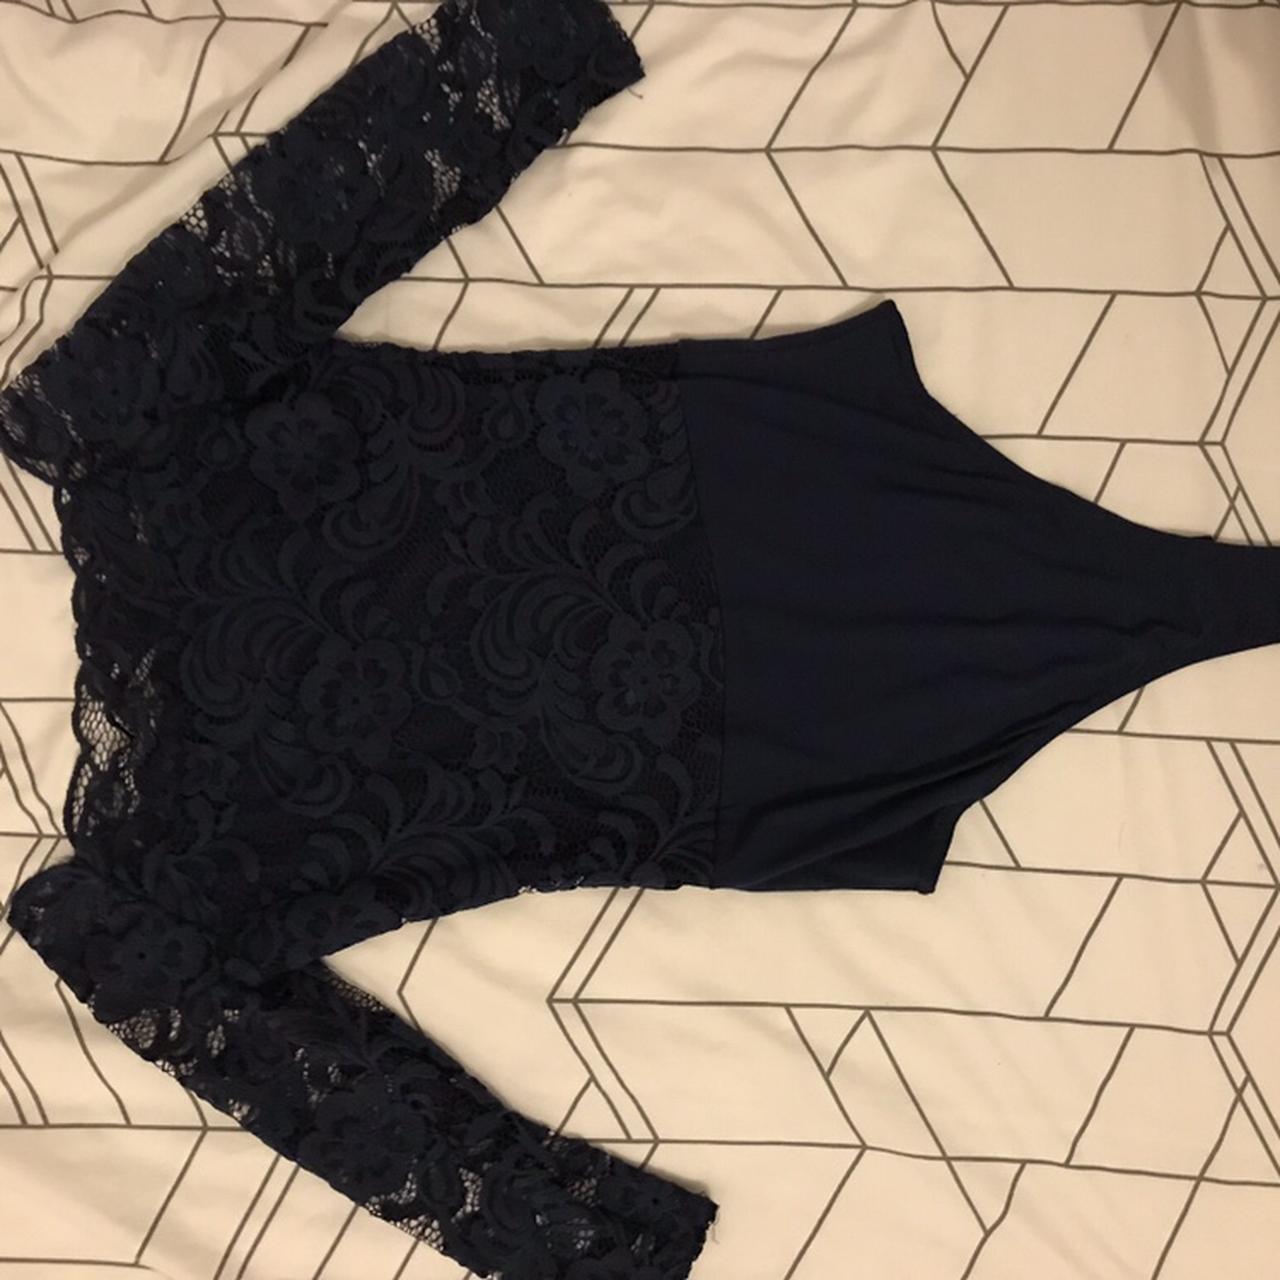 Blue body suit with lace detailing Good condition - Depop